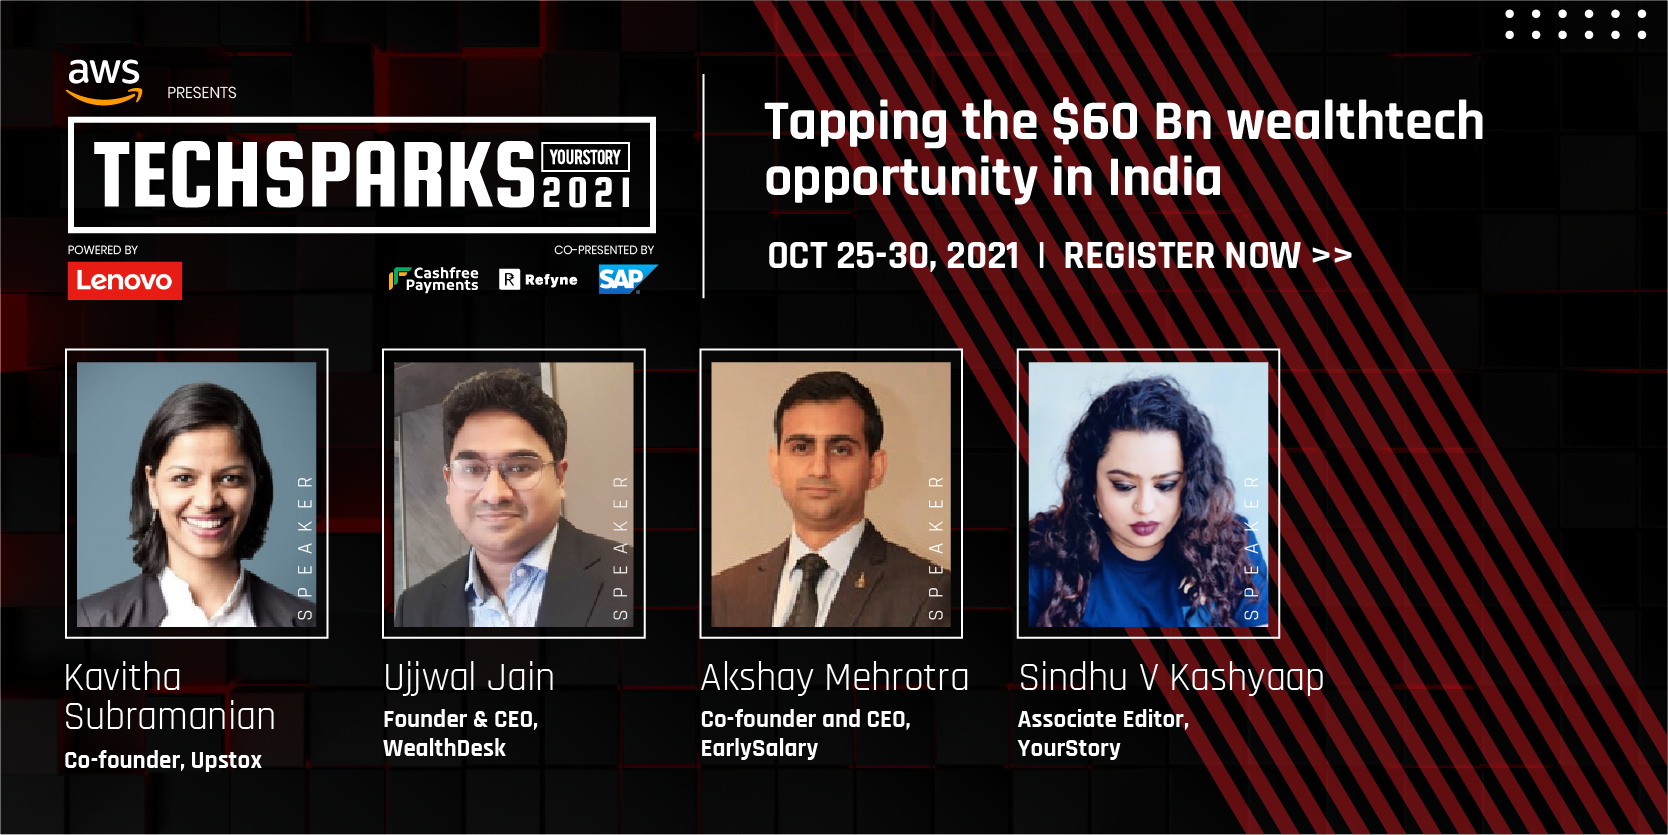 India is witnessing emergence of a new breed of tech-oriented investors, experts say at TechSparks 2021

